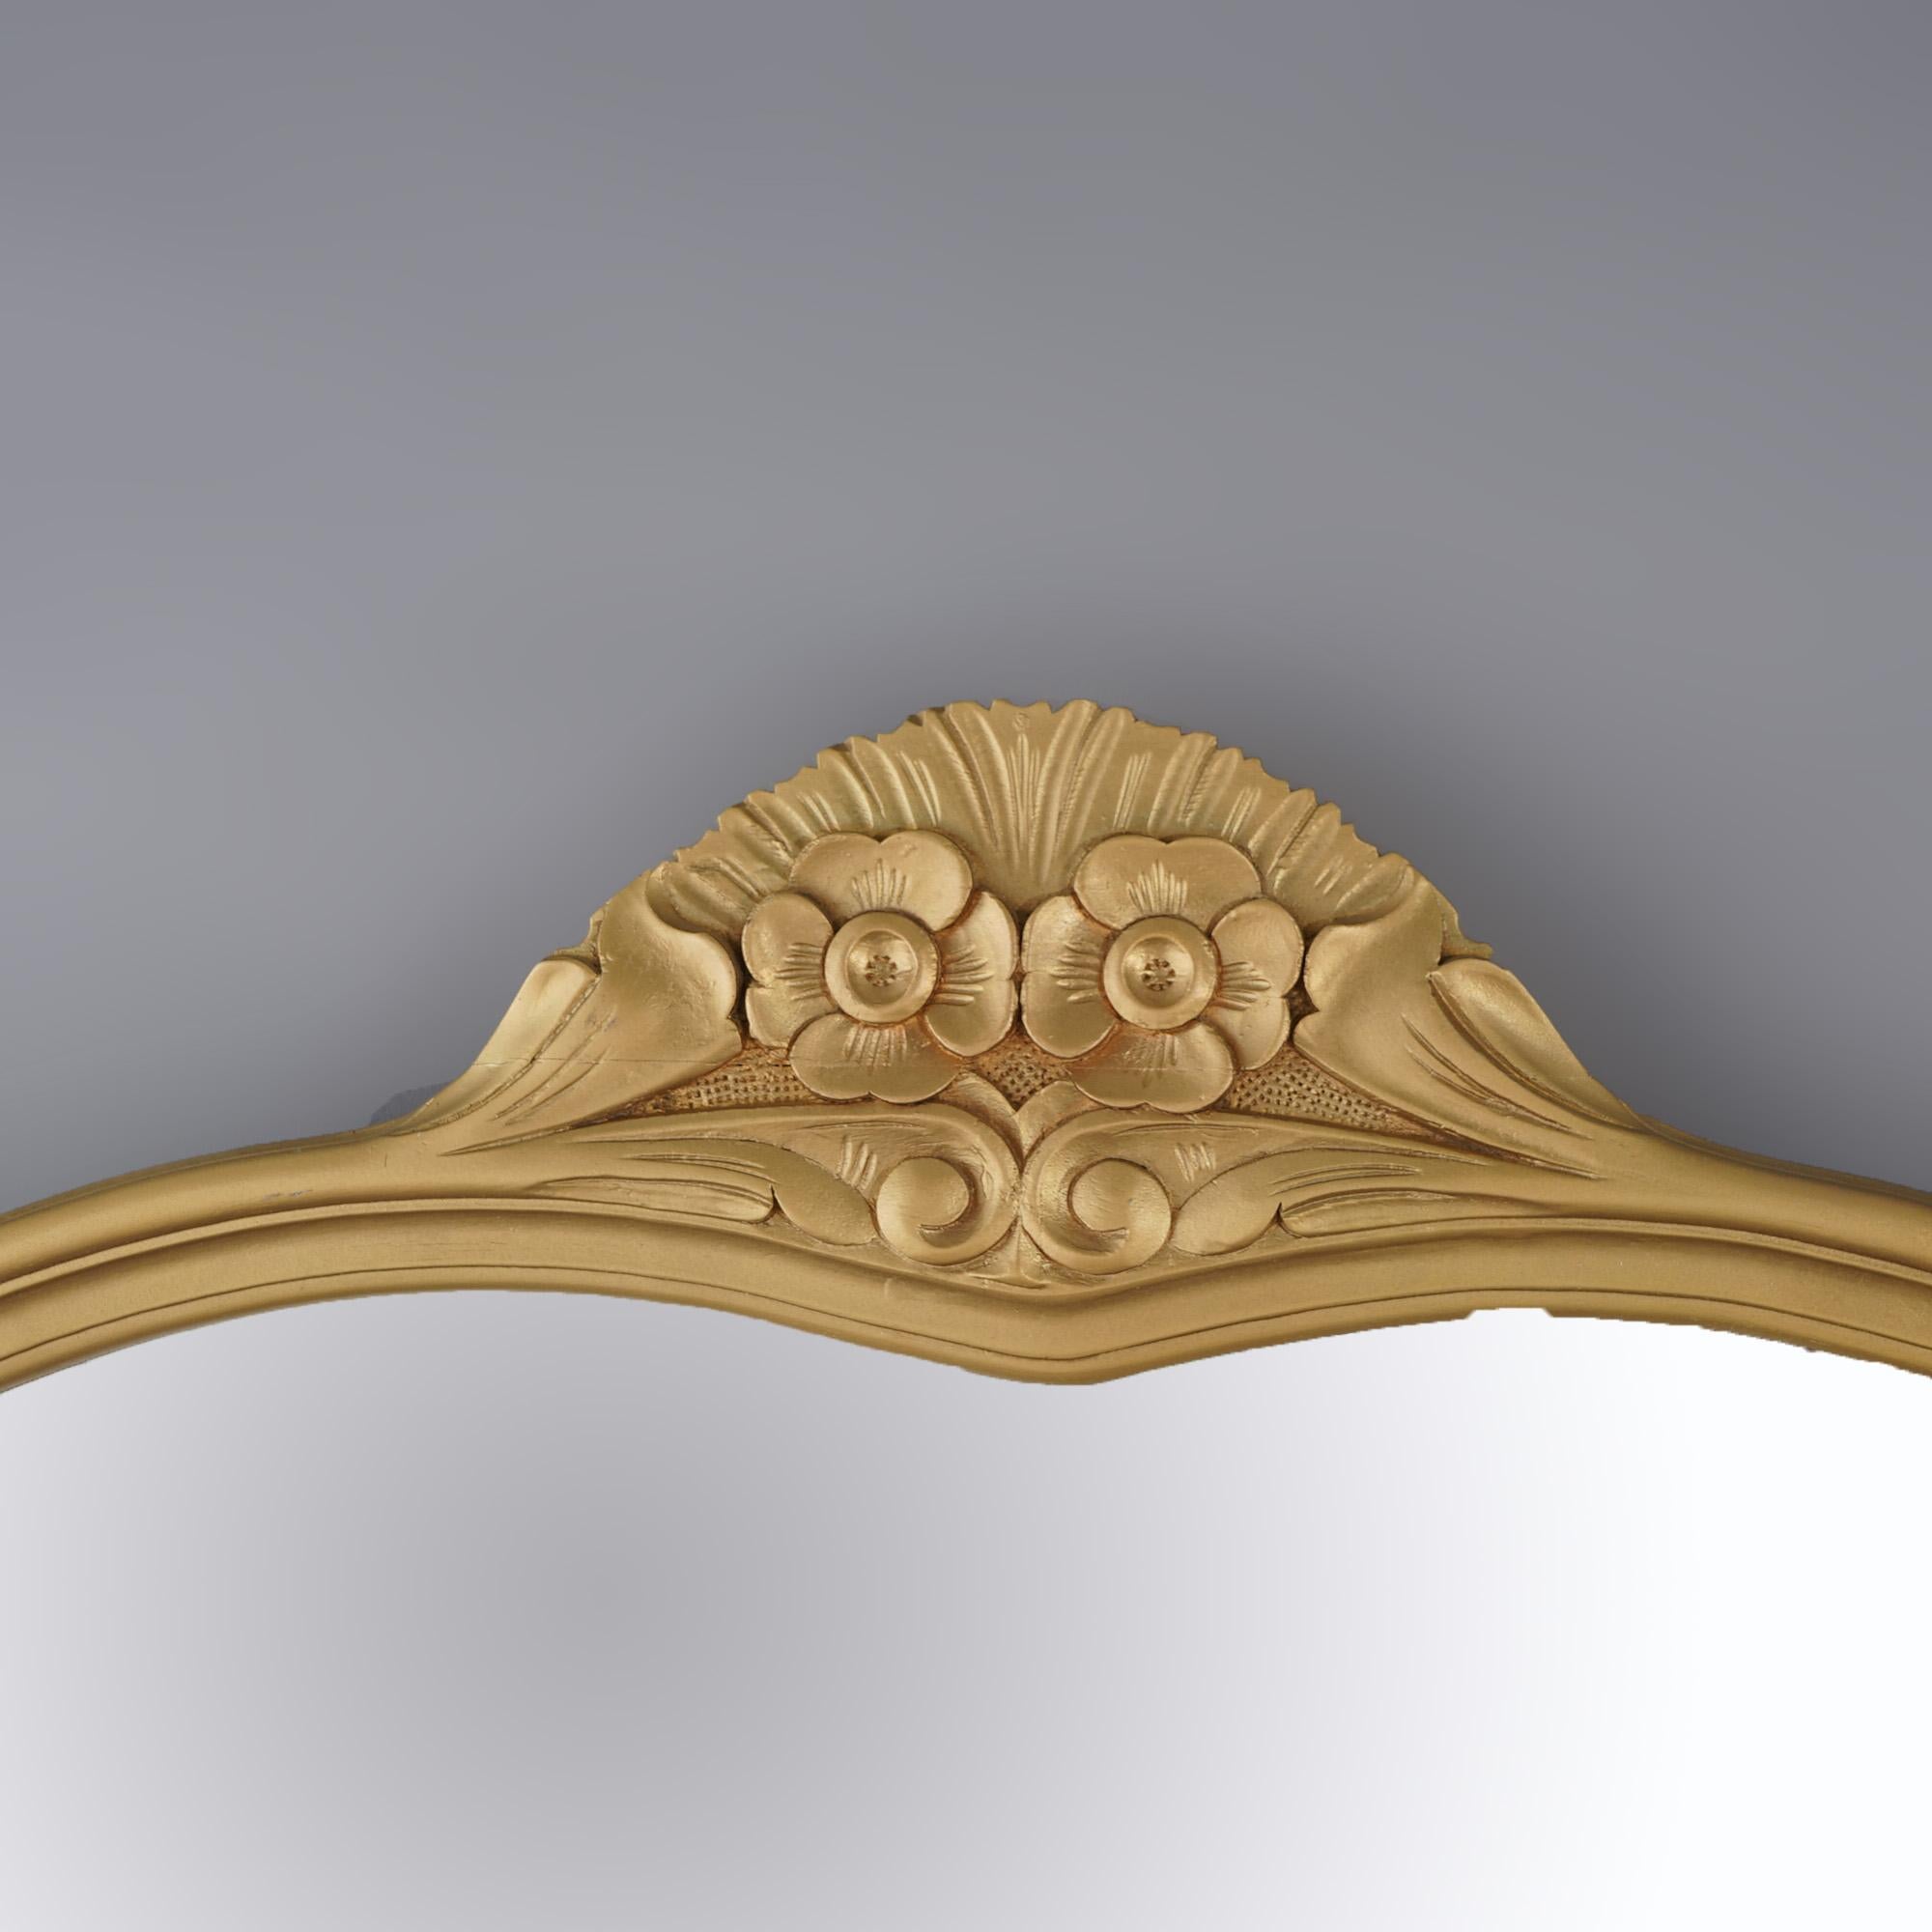 An antique Art Nouveau triptych wall mirror offers giltwood construction with floral crest over three shaped mirrors, c1920

Measures - 29.5